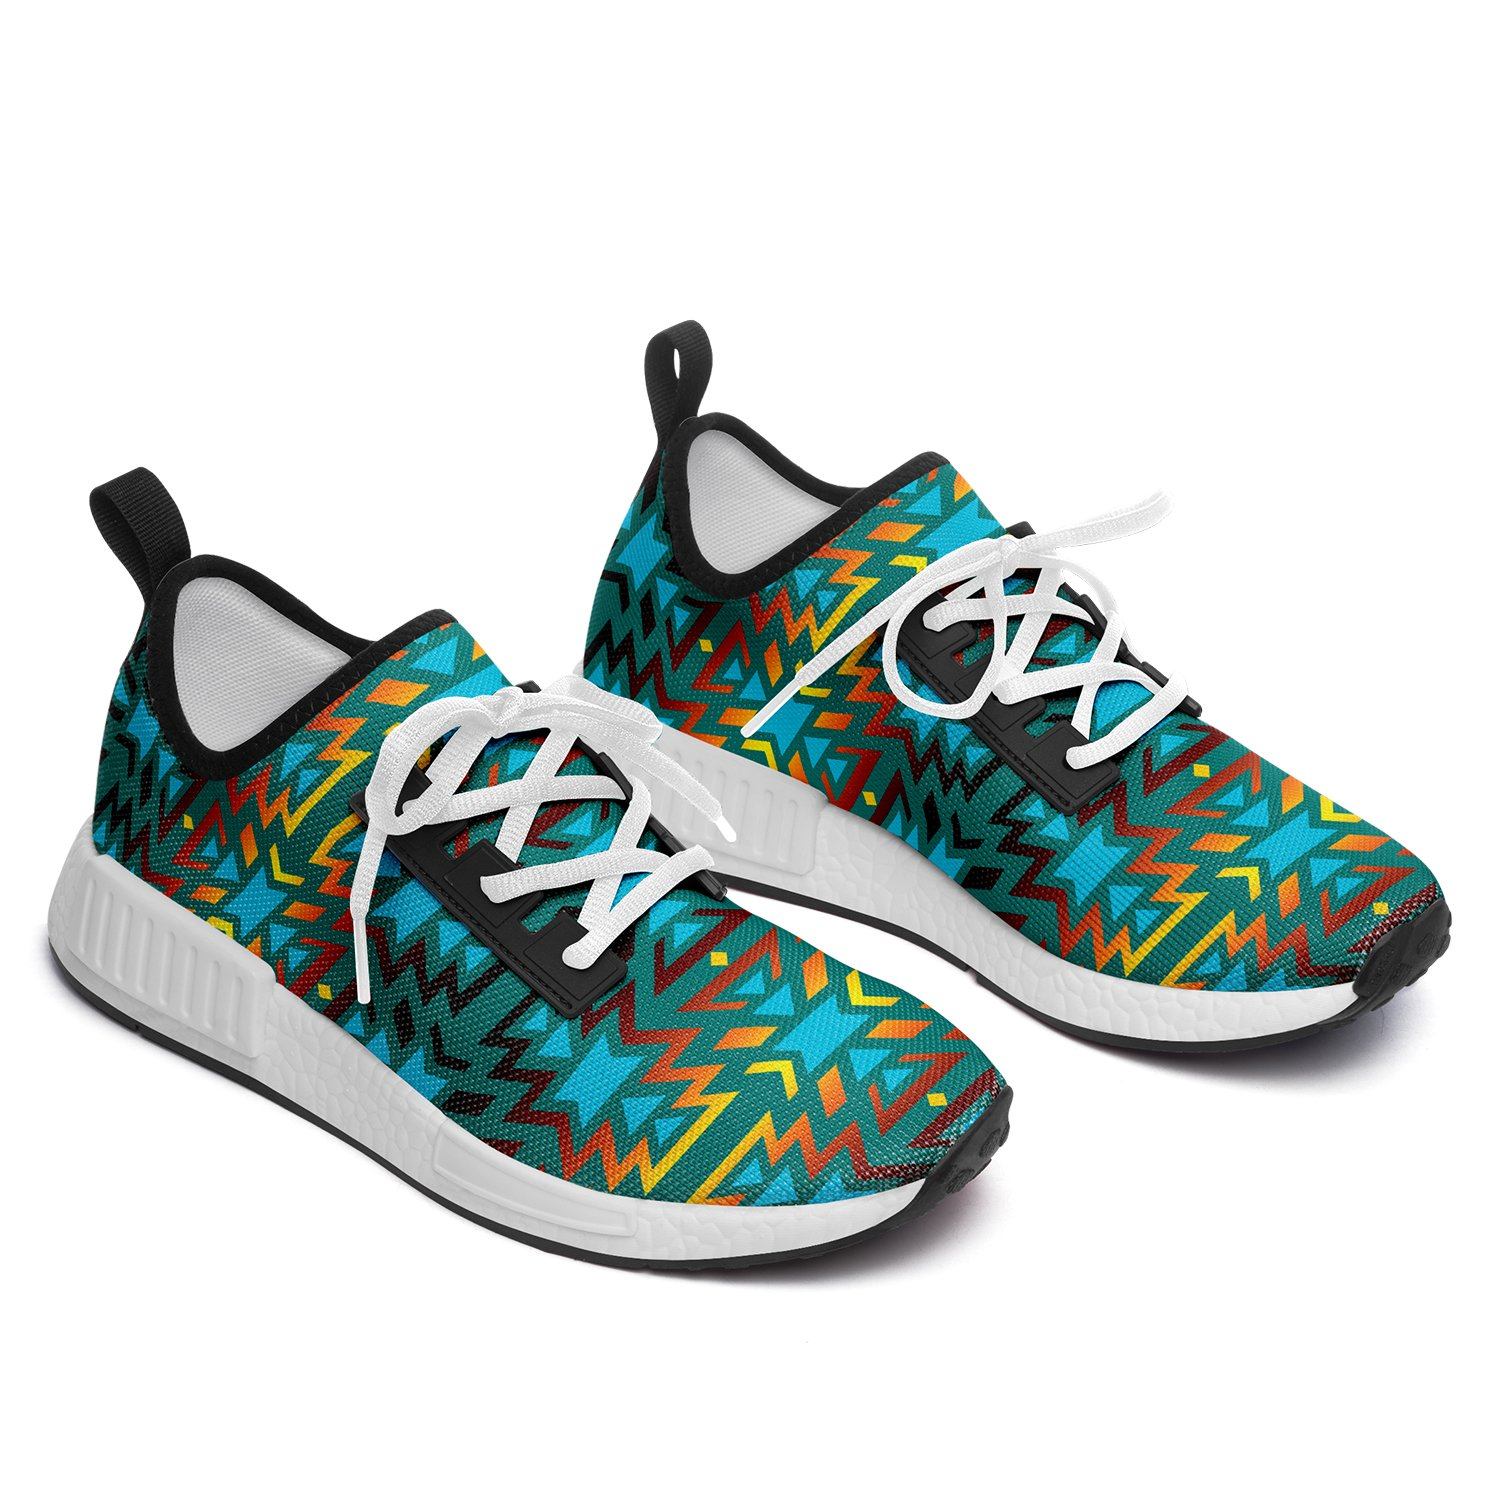 Fire Colors and Turquoise Teal Draco Running Shoes 49 Dzine 